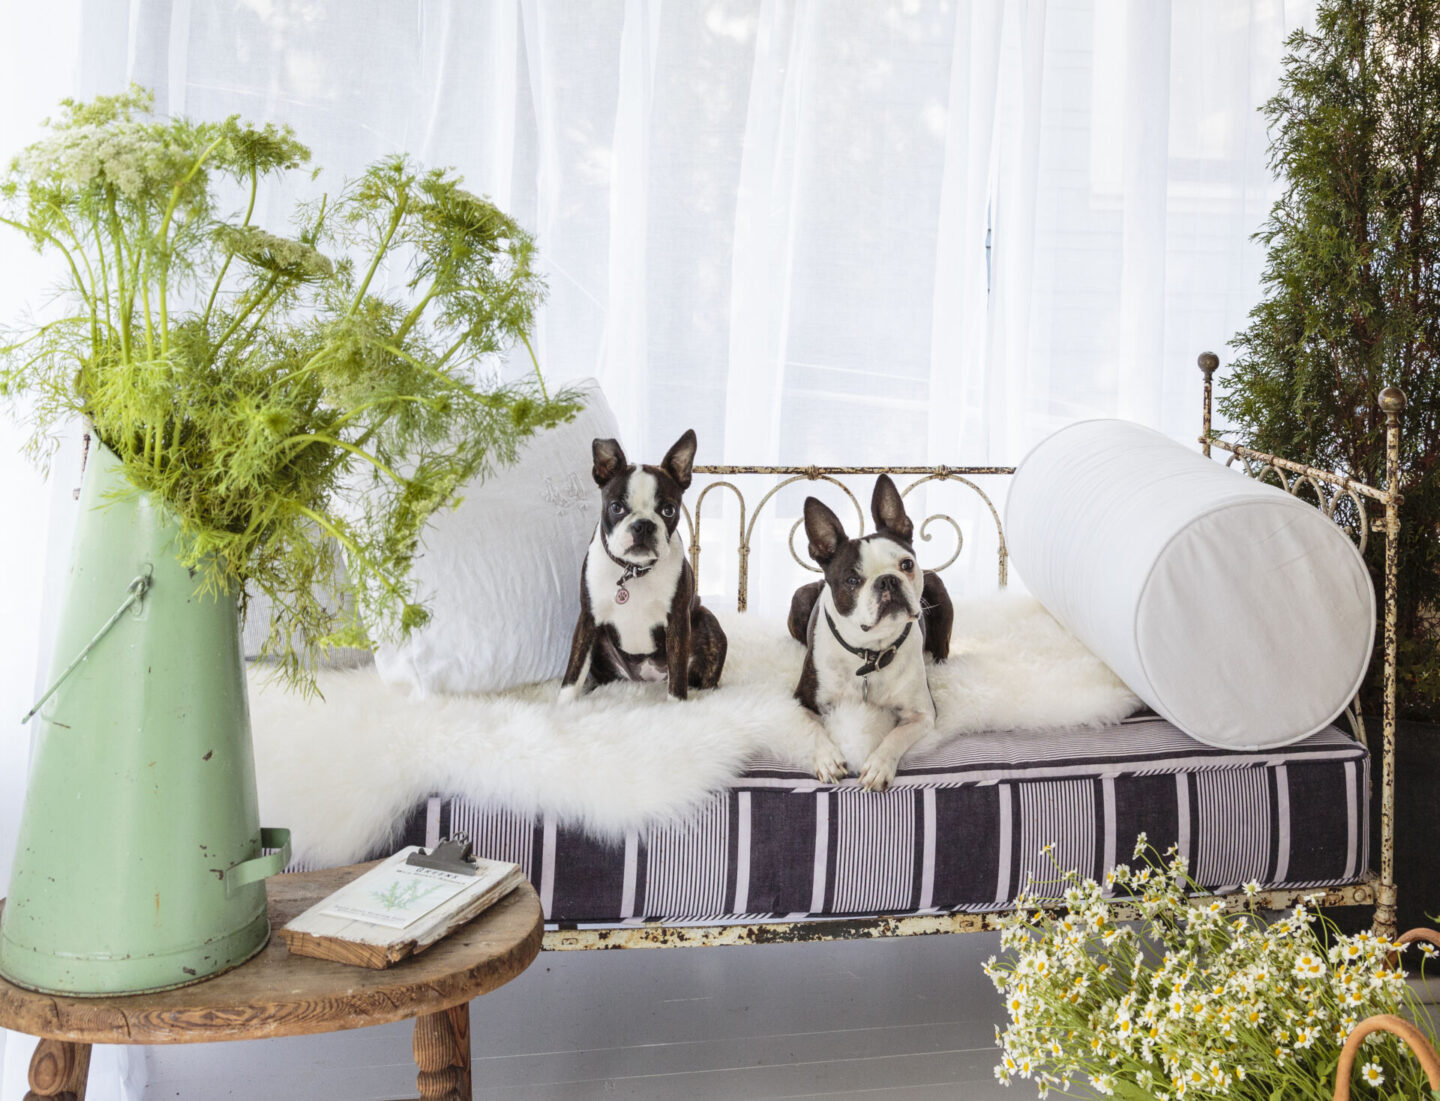 Sweet Boston Terriers lounging on an antique daybed on a cottage porch - styling by Fifi O'Neill and photo by Mark Lohman. #shadesofwhite #fifioneill